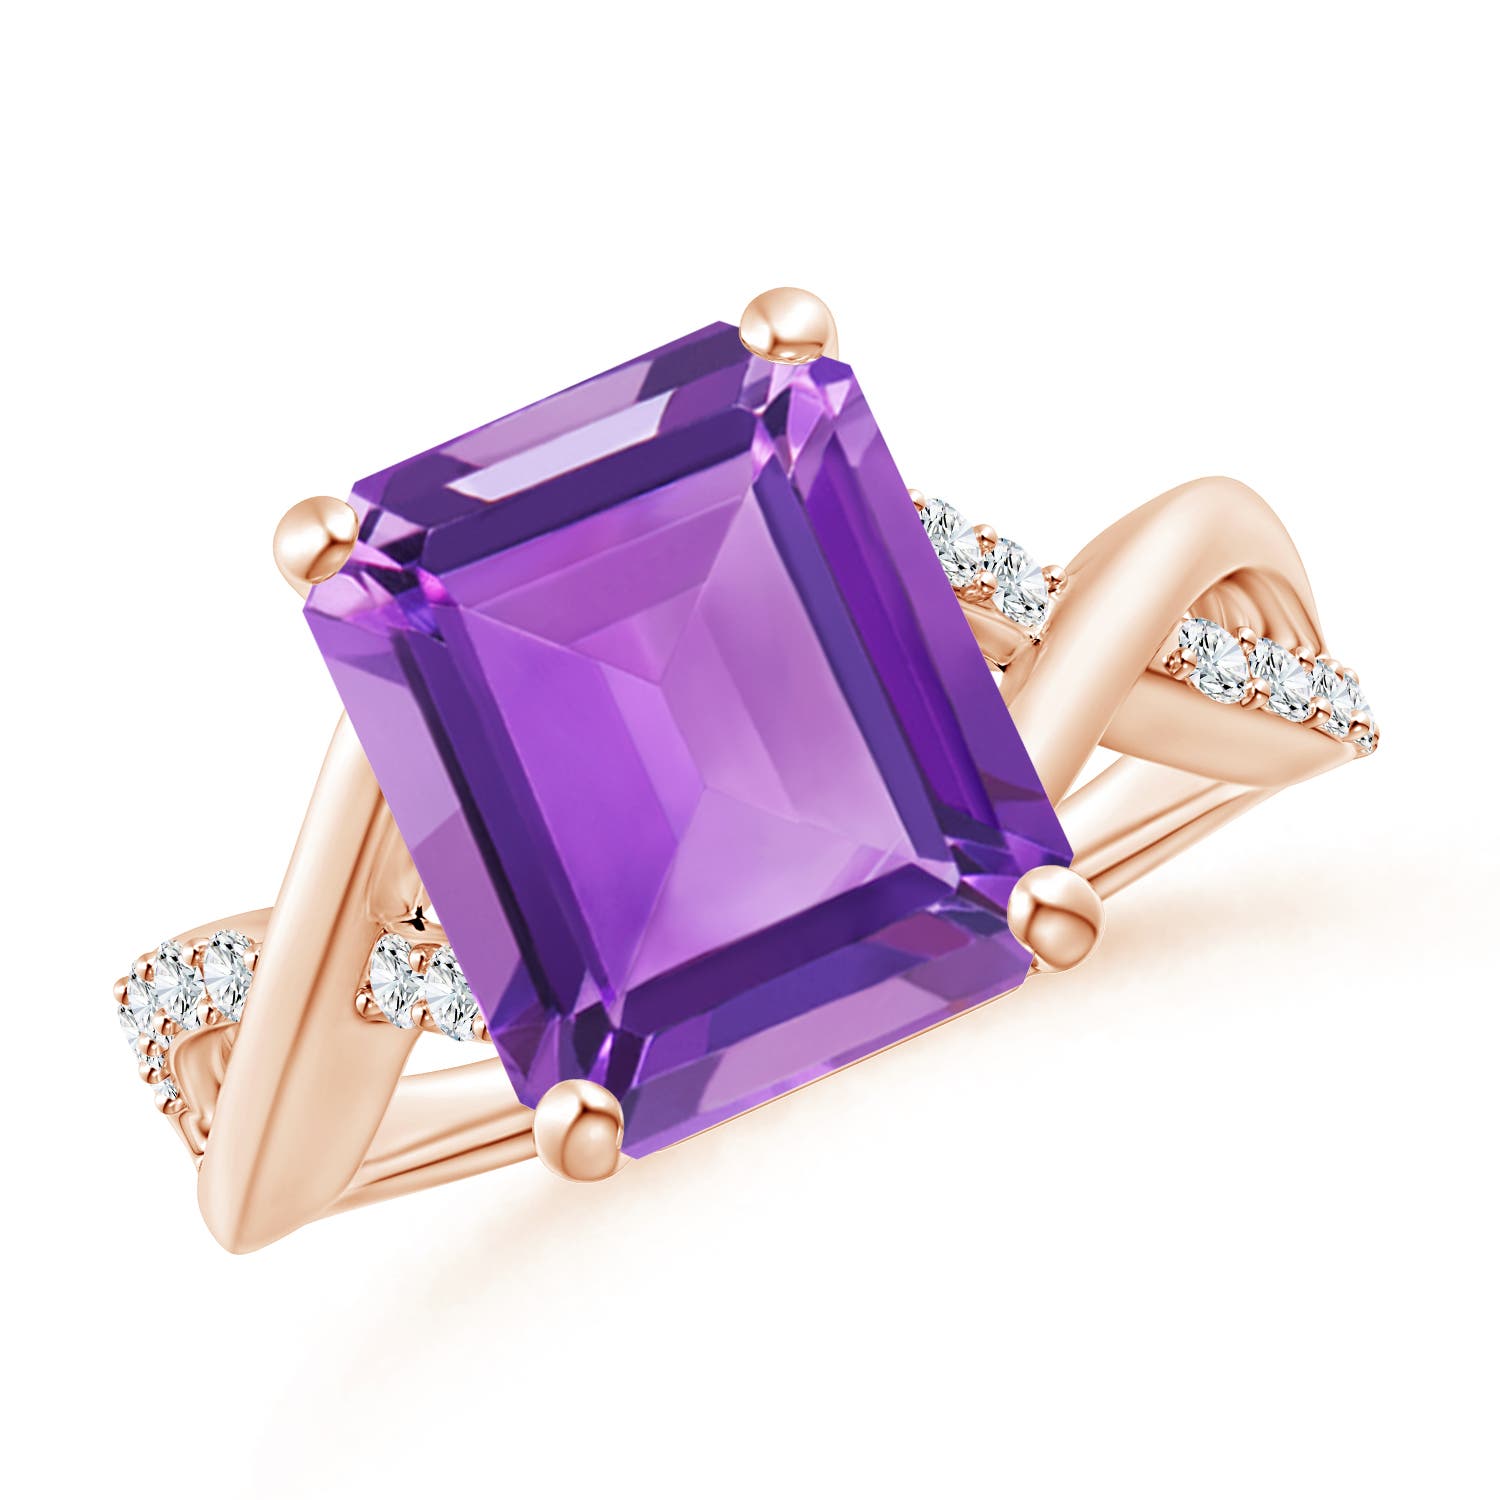 AA - Amethyst / 5.47 CT / 14 KT Rose Gold